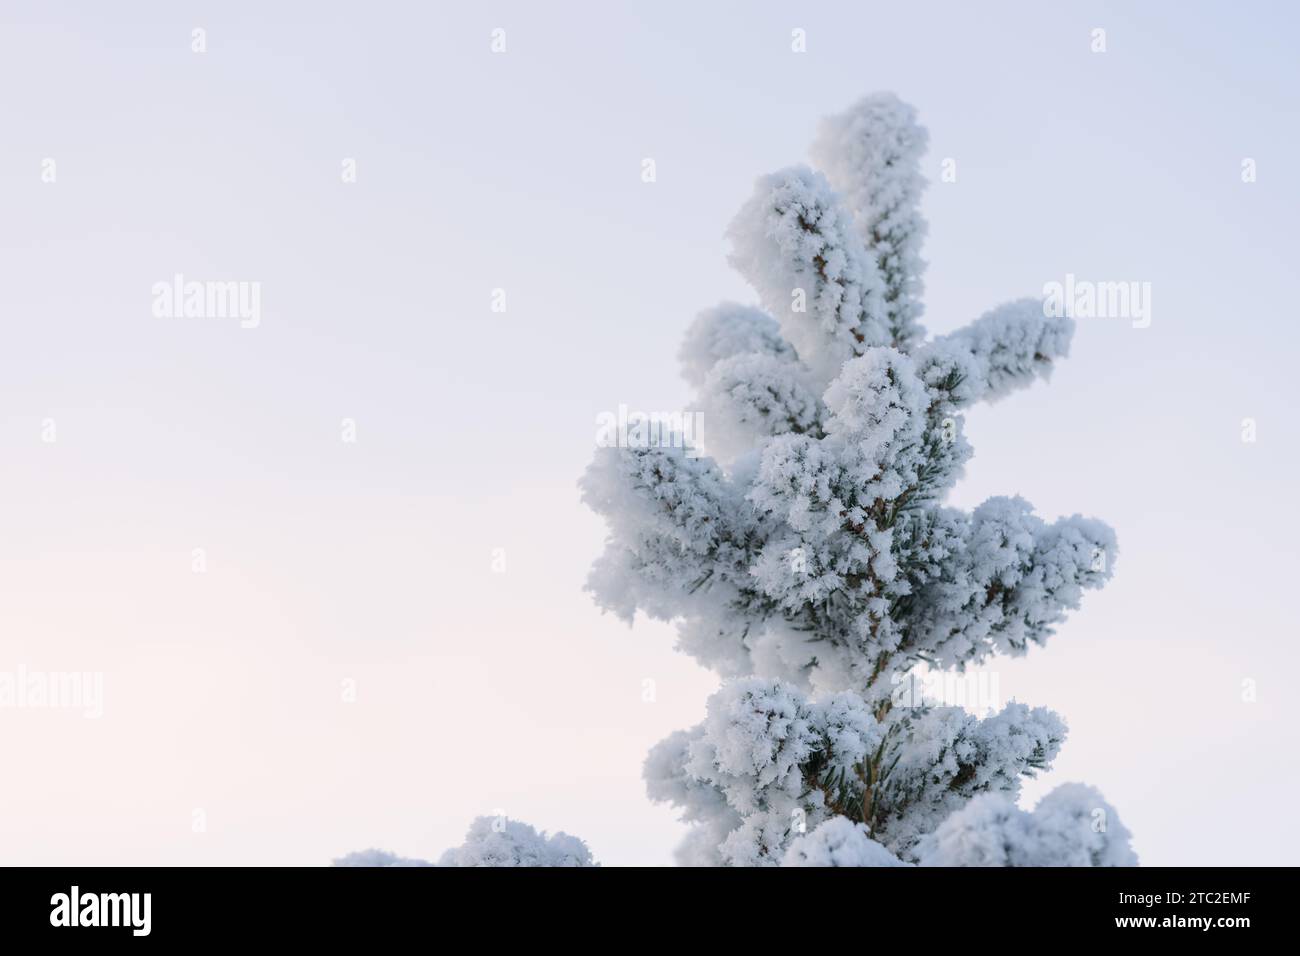 Closeup photo of spruce tree top covered with hoarfrost after very cold night, shallow focus Stock Photo